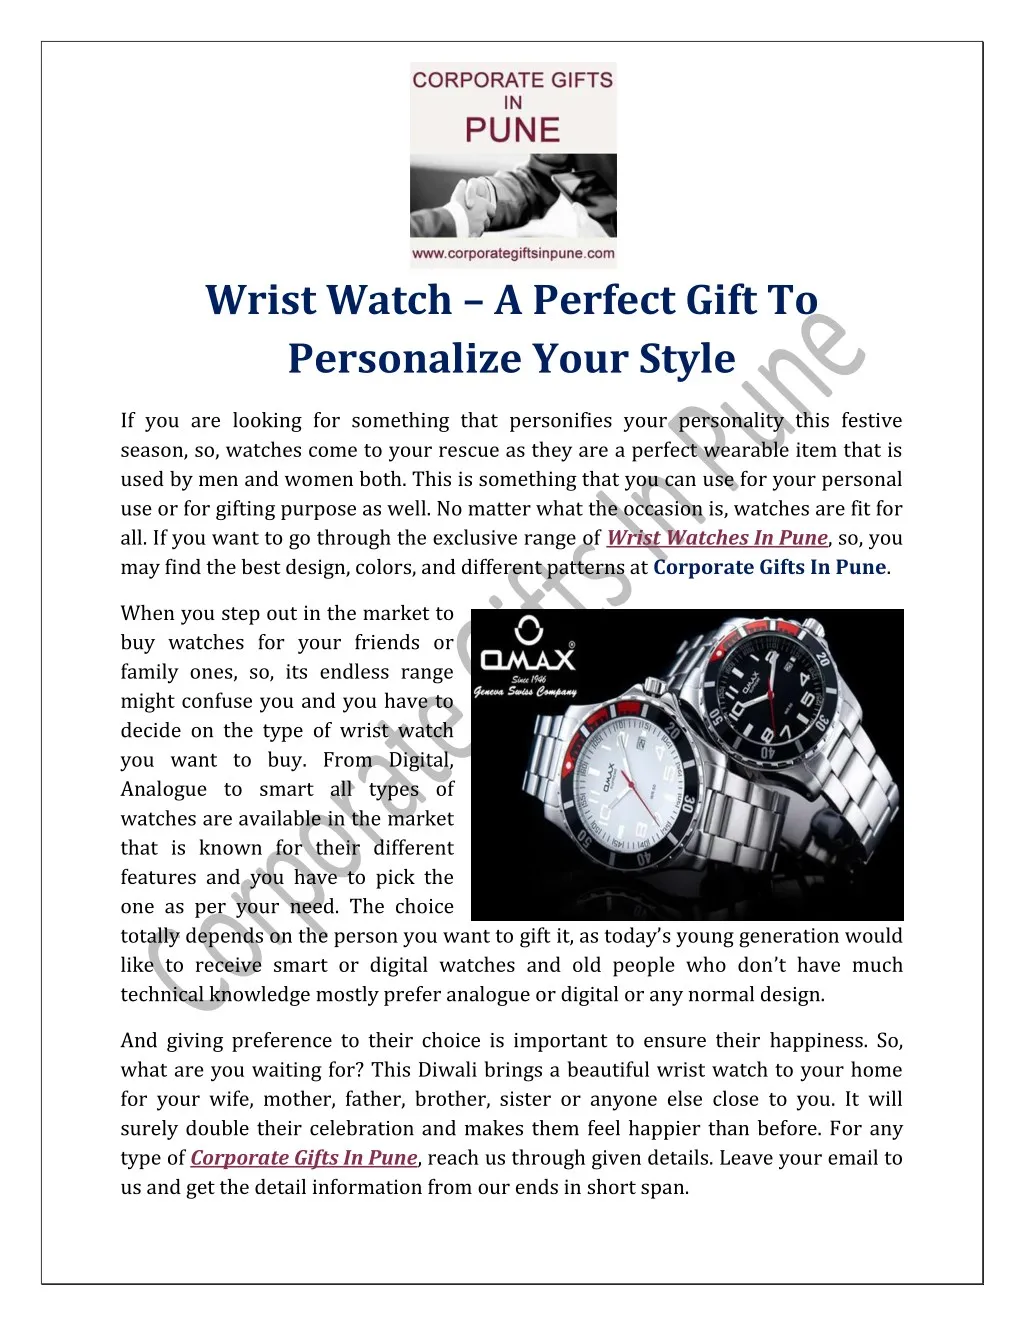 wrist watch a perfect gift to personalize your